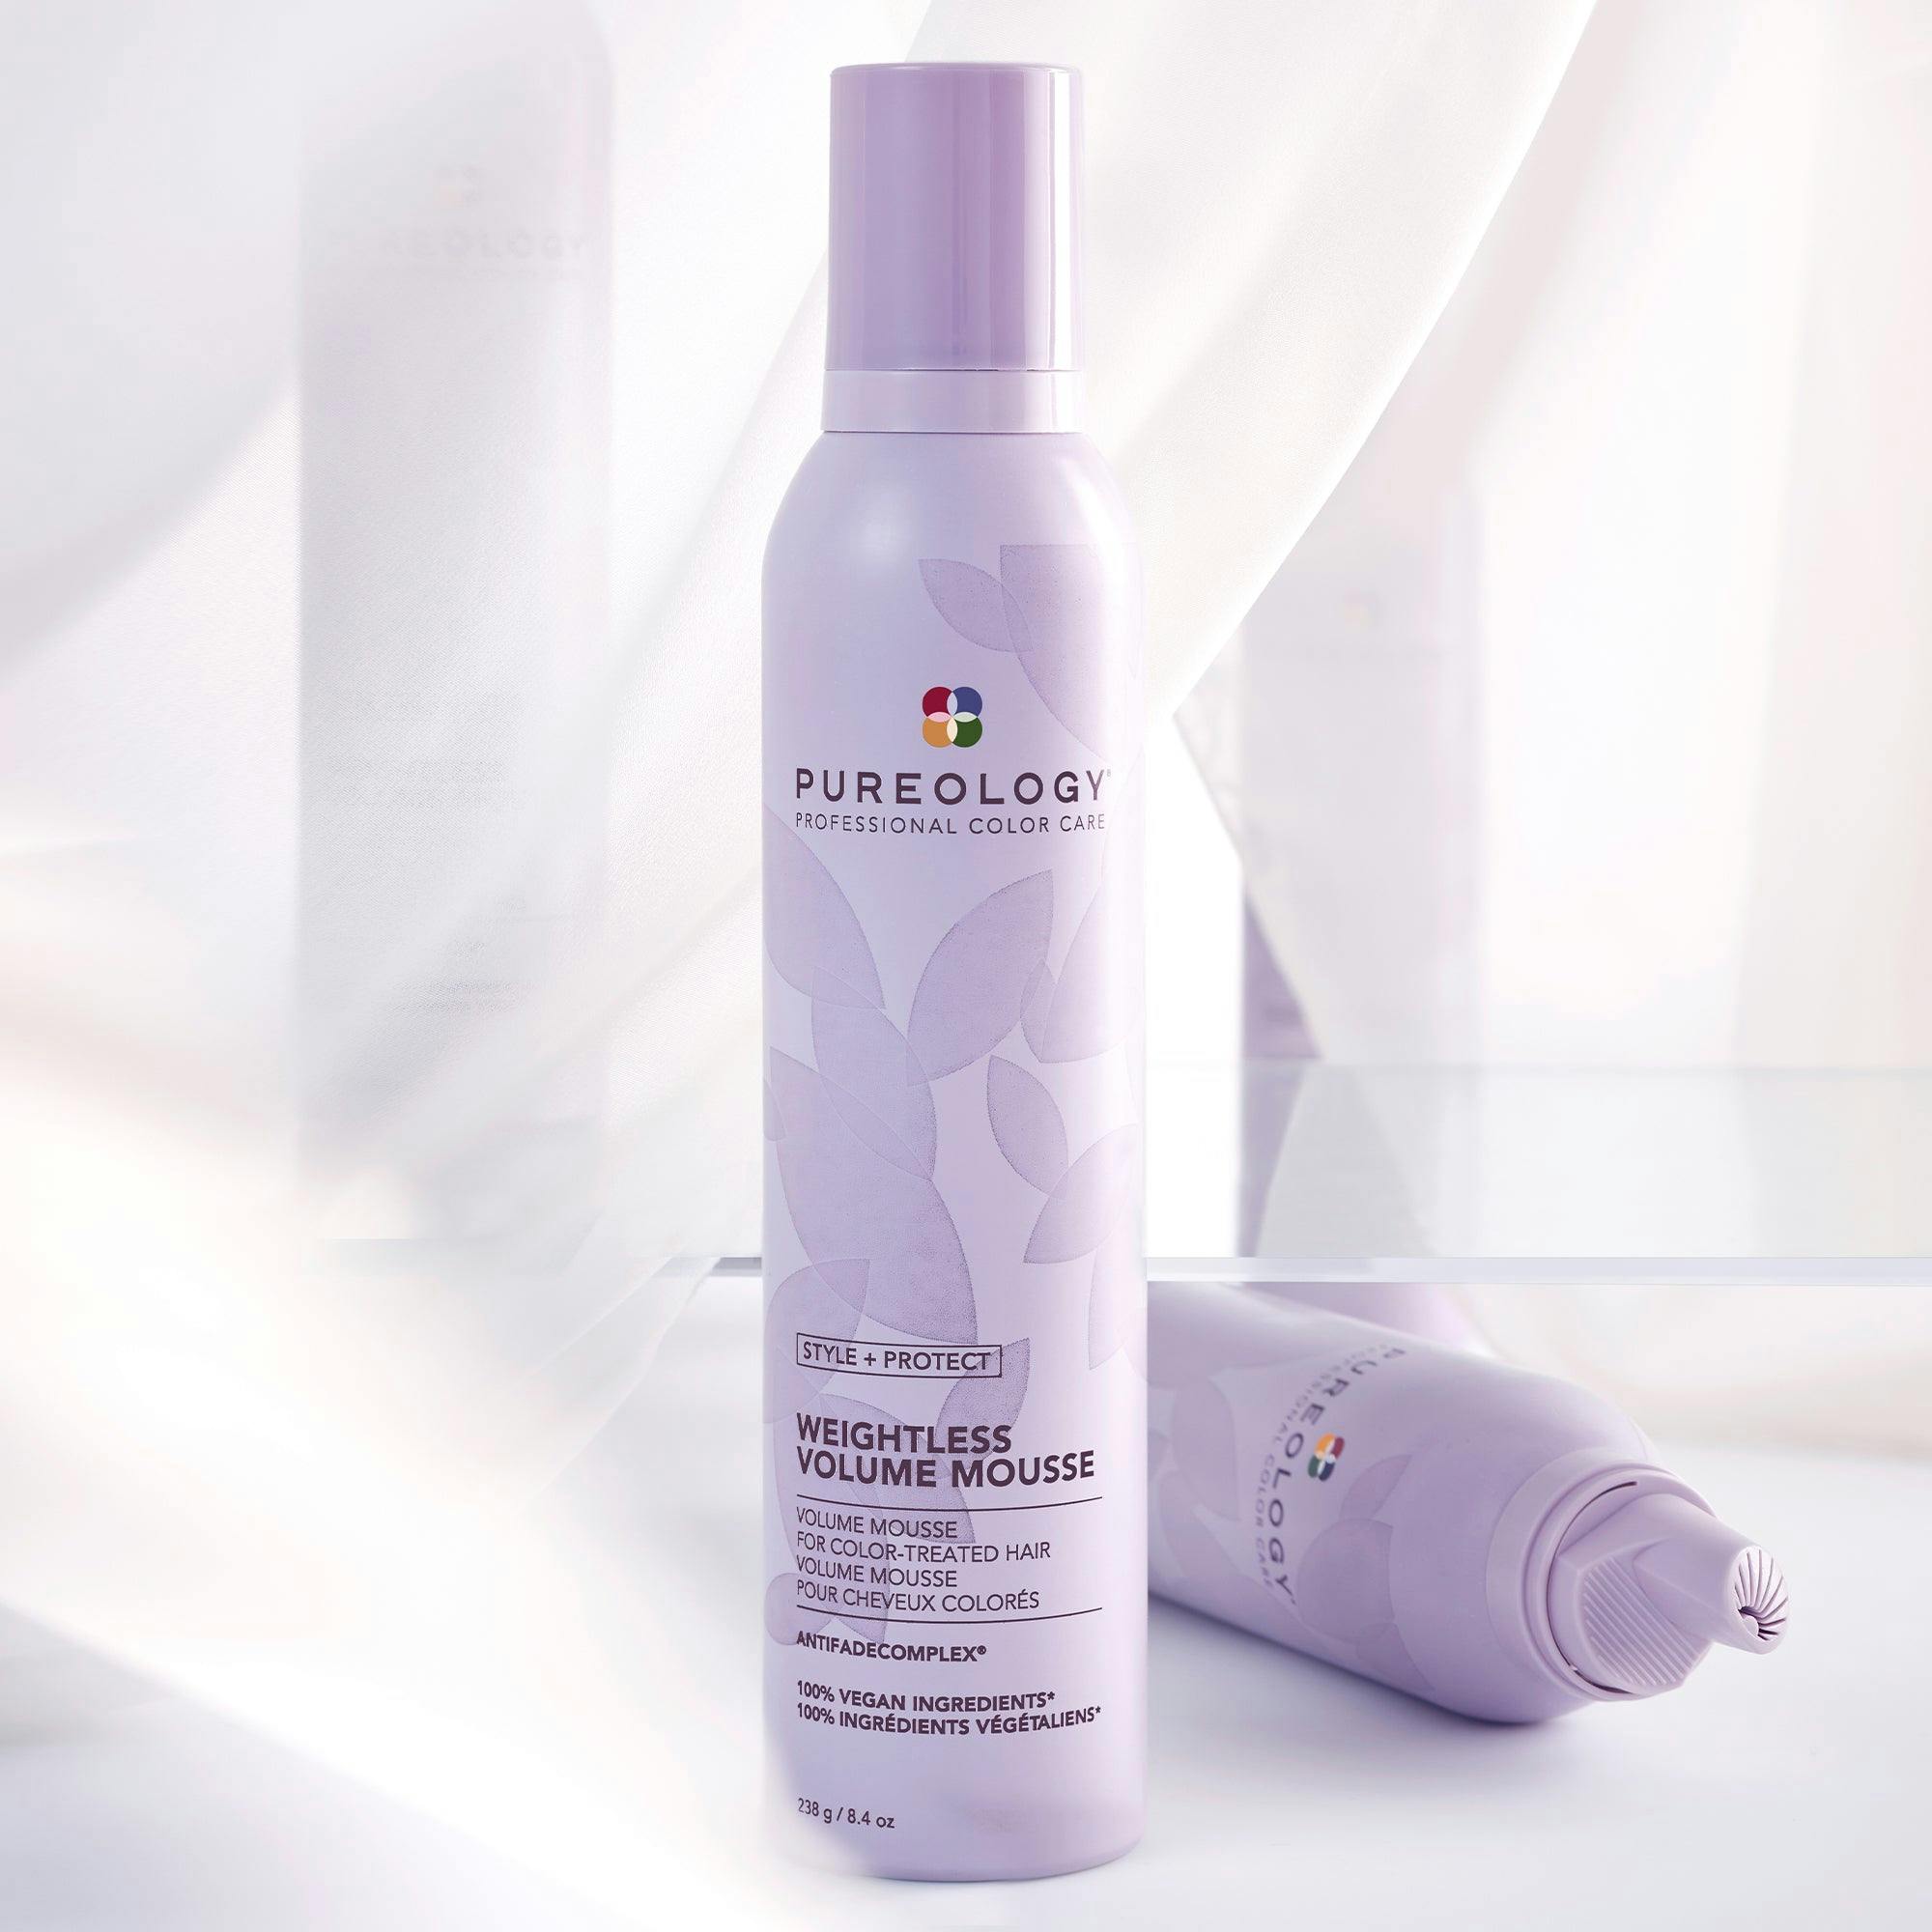 Pureology Style + Protect Weightless Volume Mousse 238g